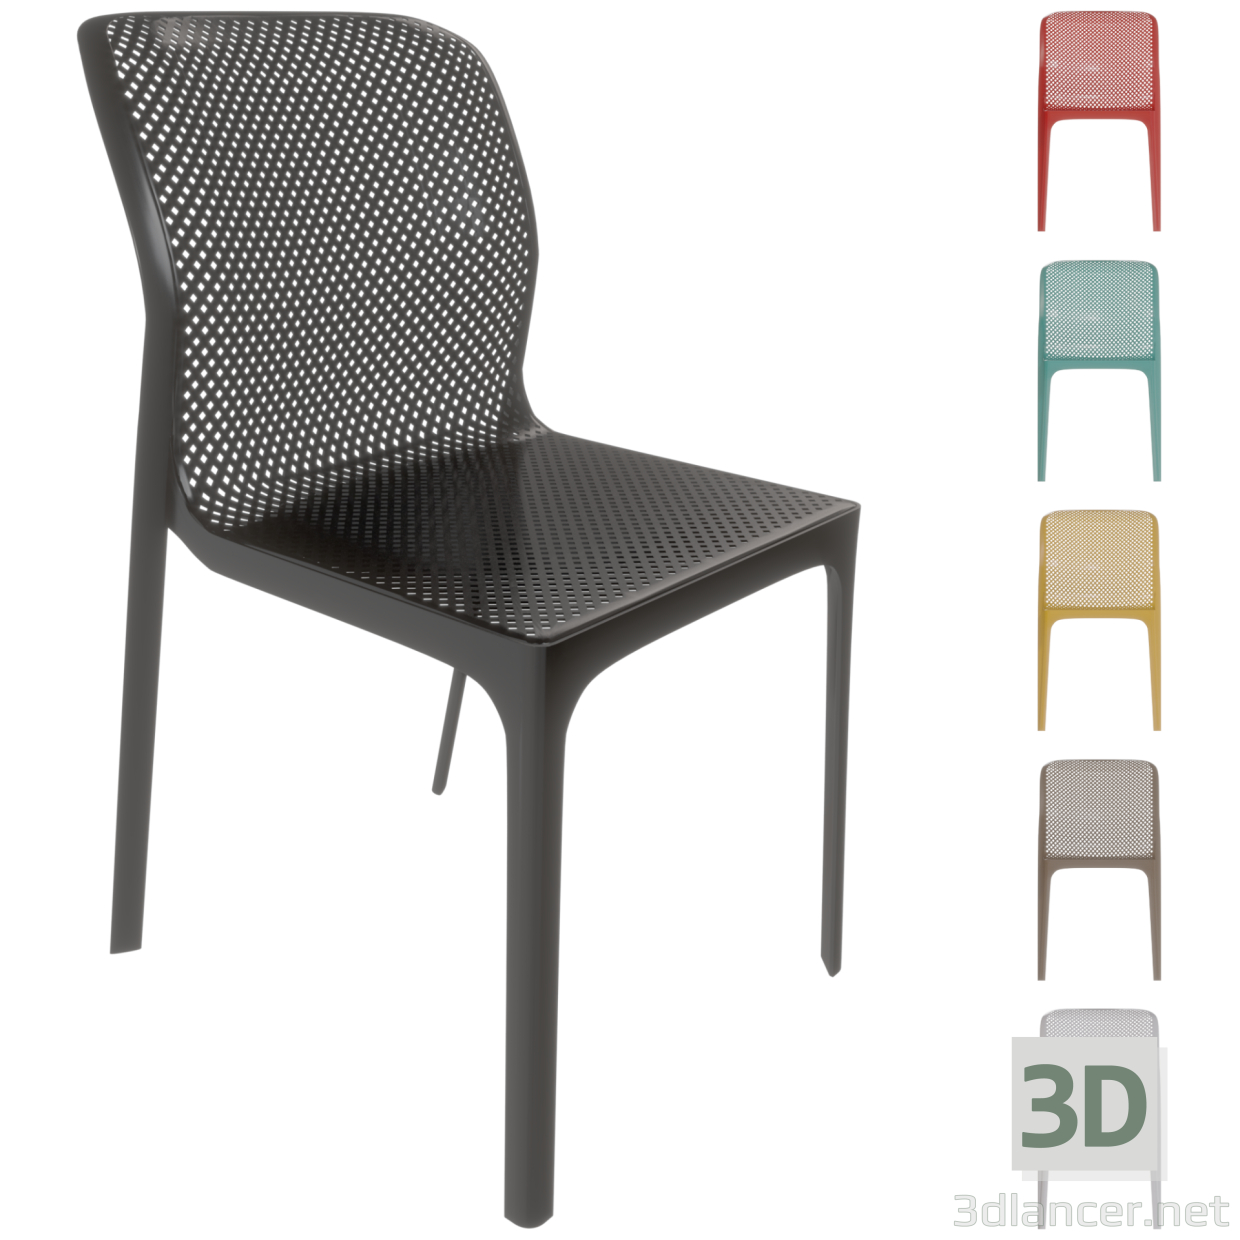 3d Plastic chair BIT without armrests Trademark NARDI in 6 different colors. model buy - render